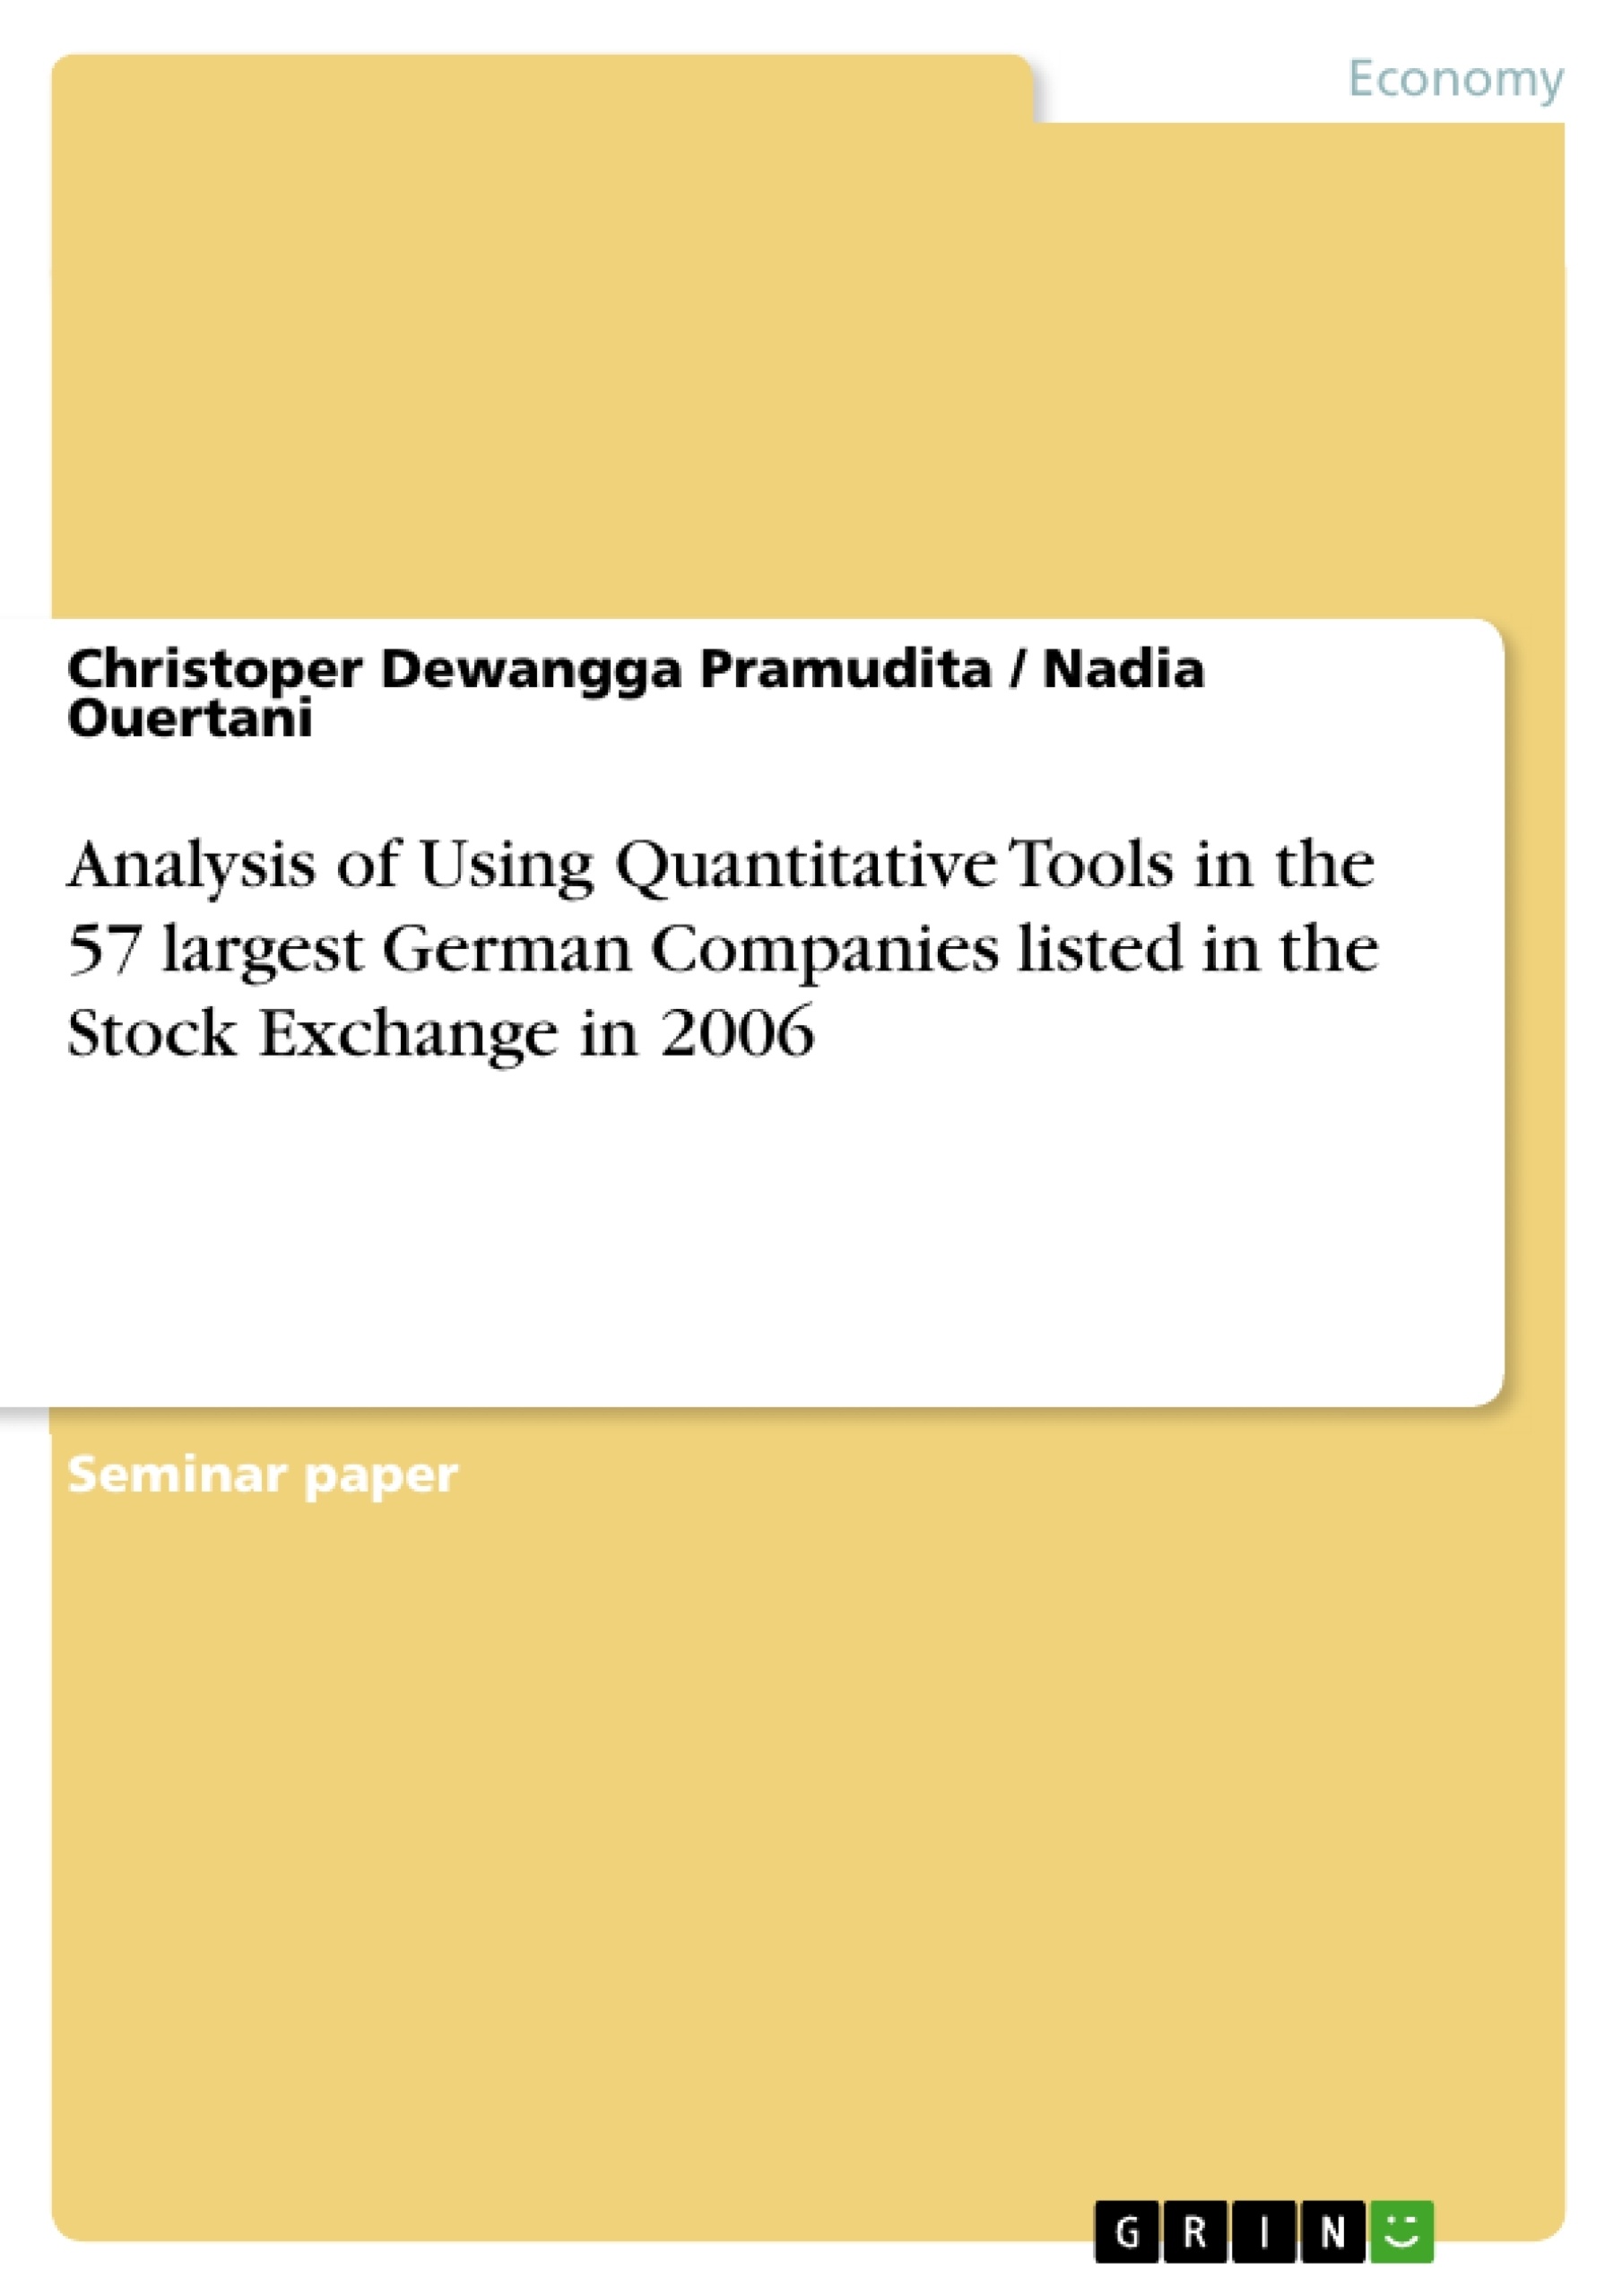 Title: Analysis of Using Quantitative Tools in the 57 largest German Companies listed in the Stock Exchange in 2006